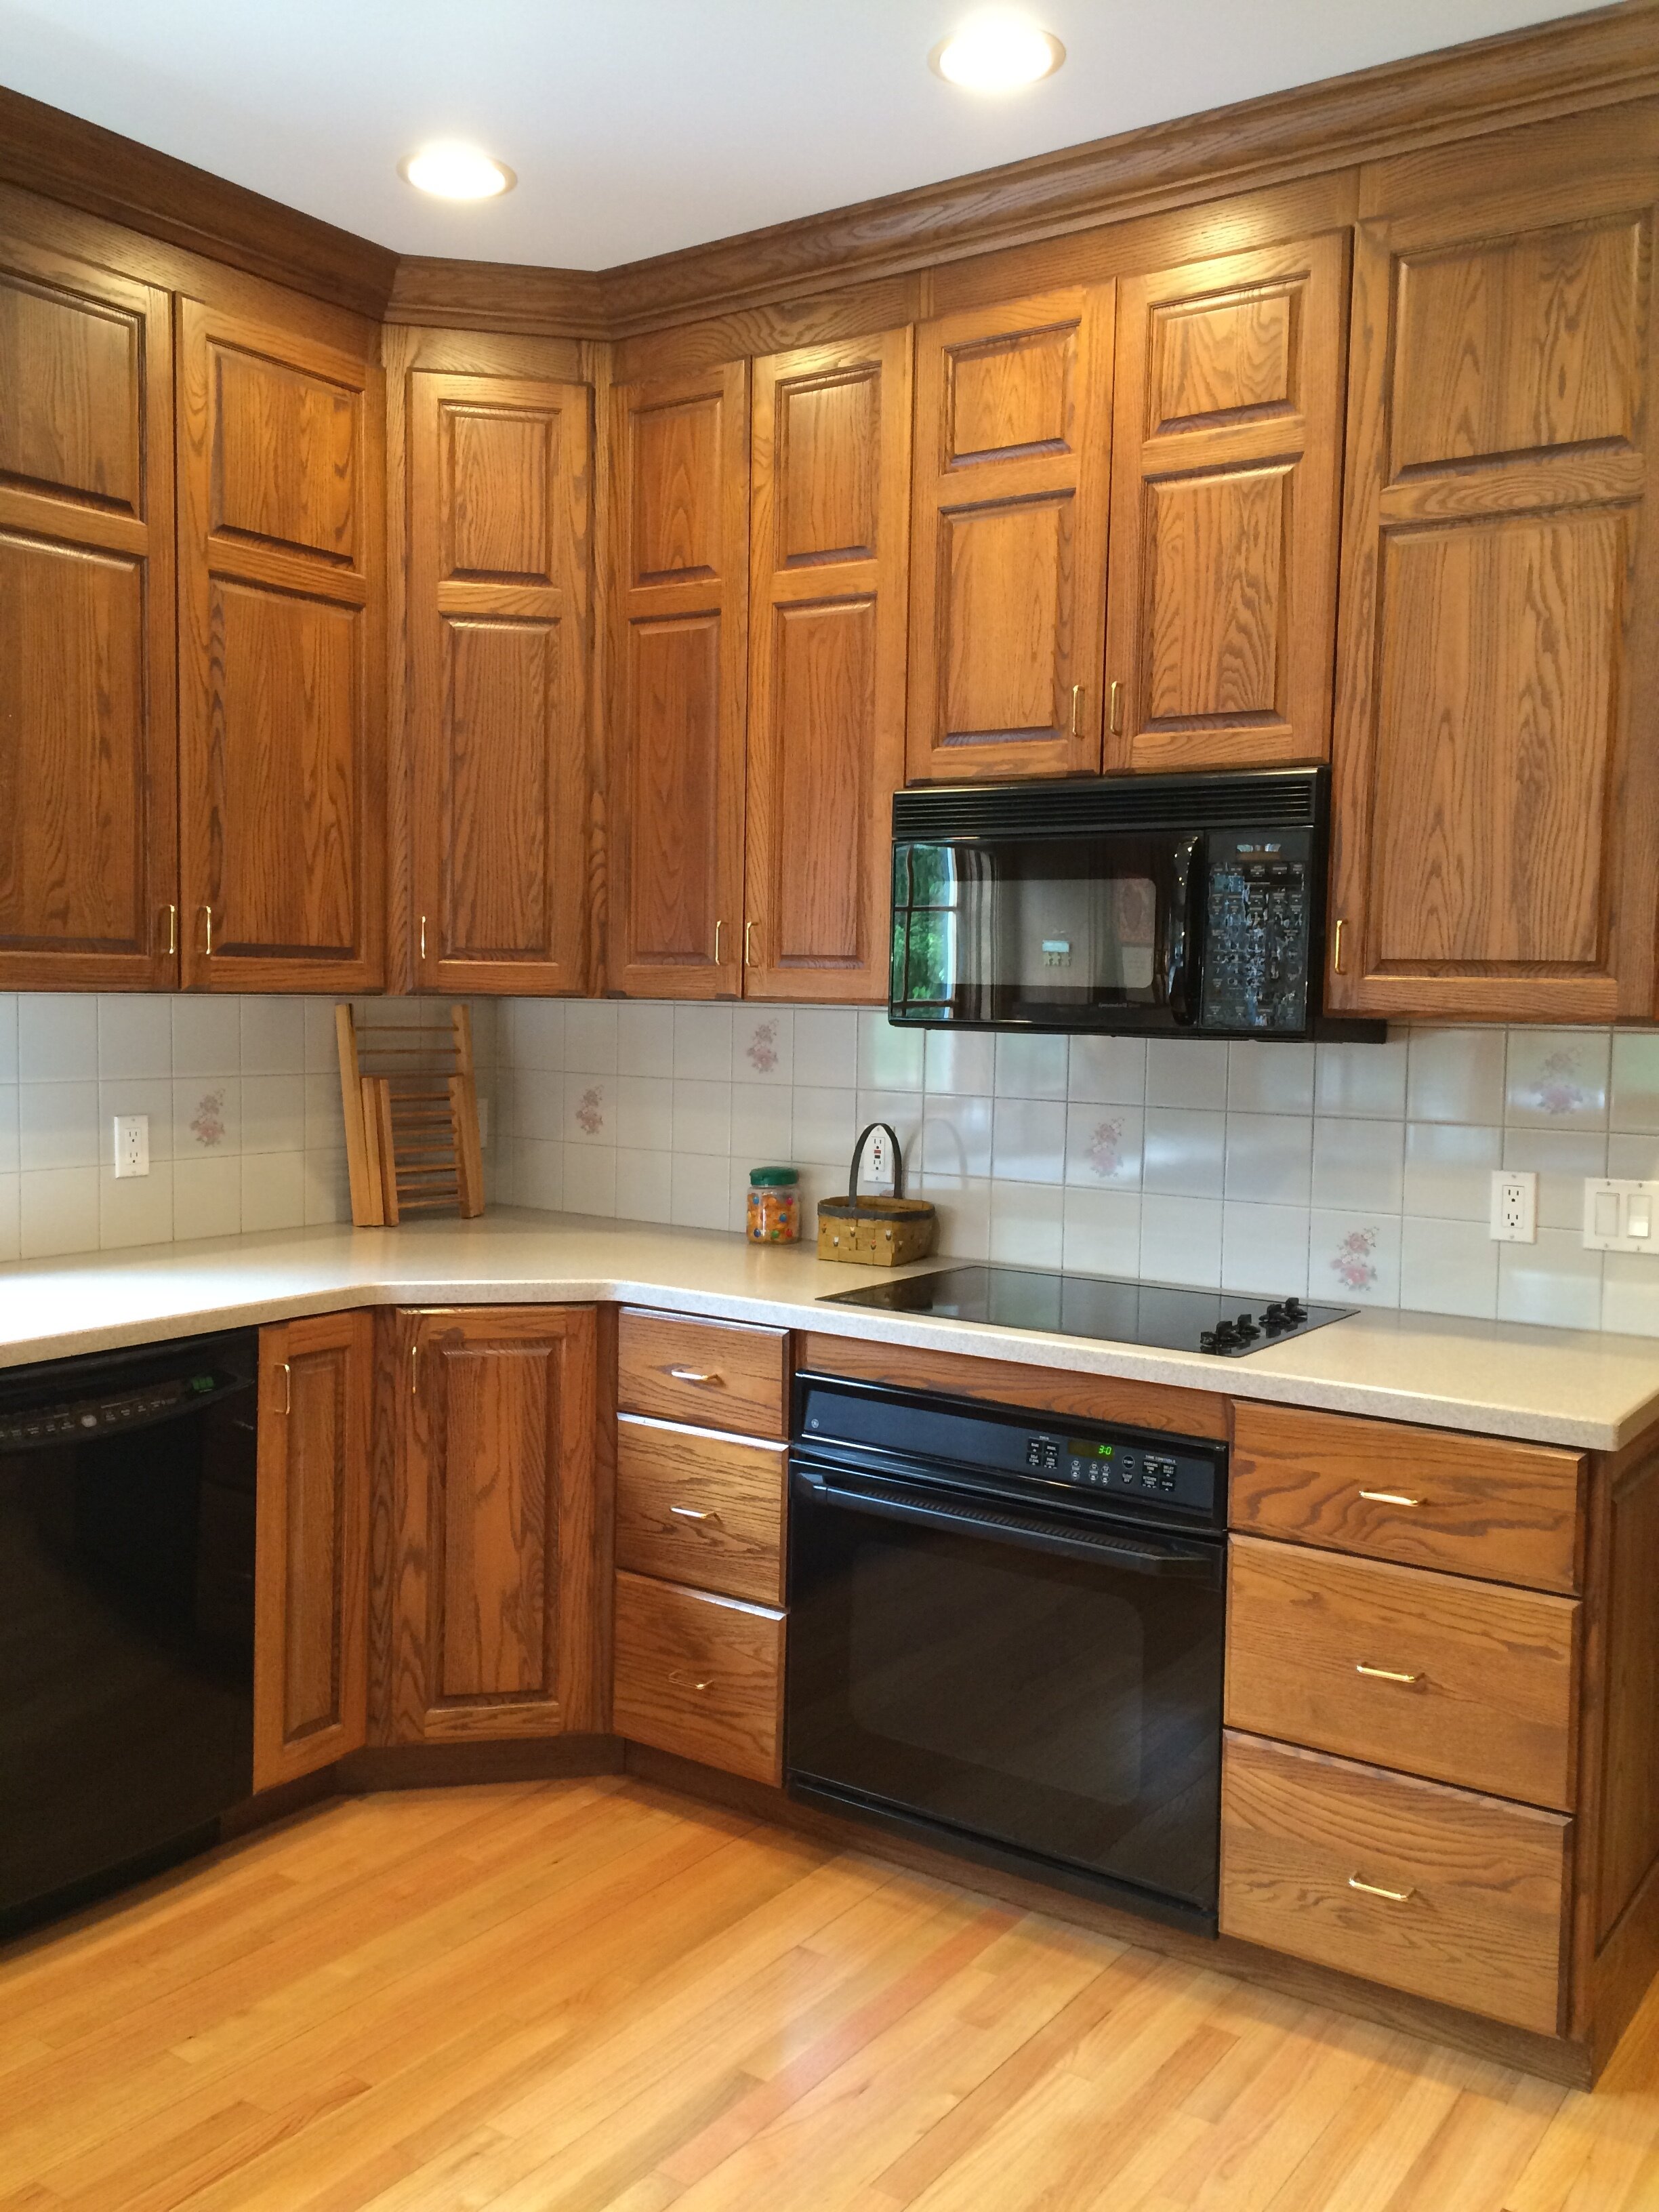 How To Make Oak Kitchen Cabinets Look Modern?